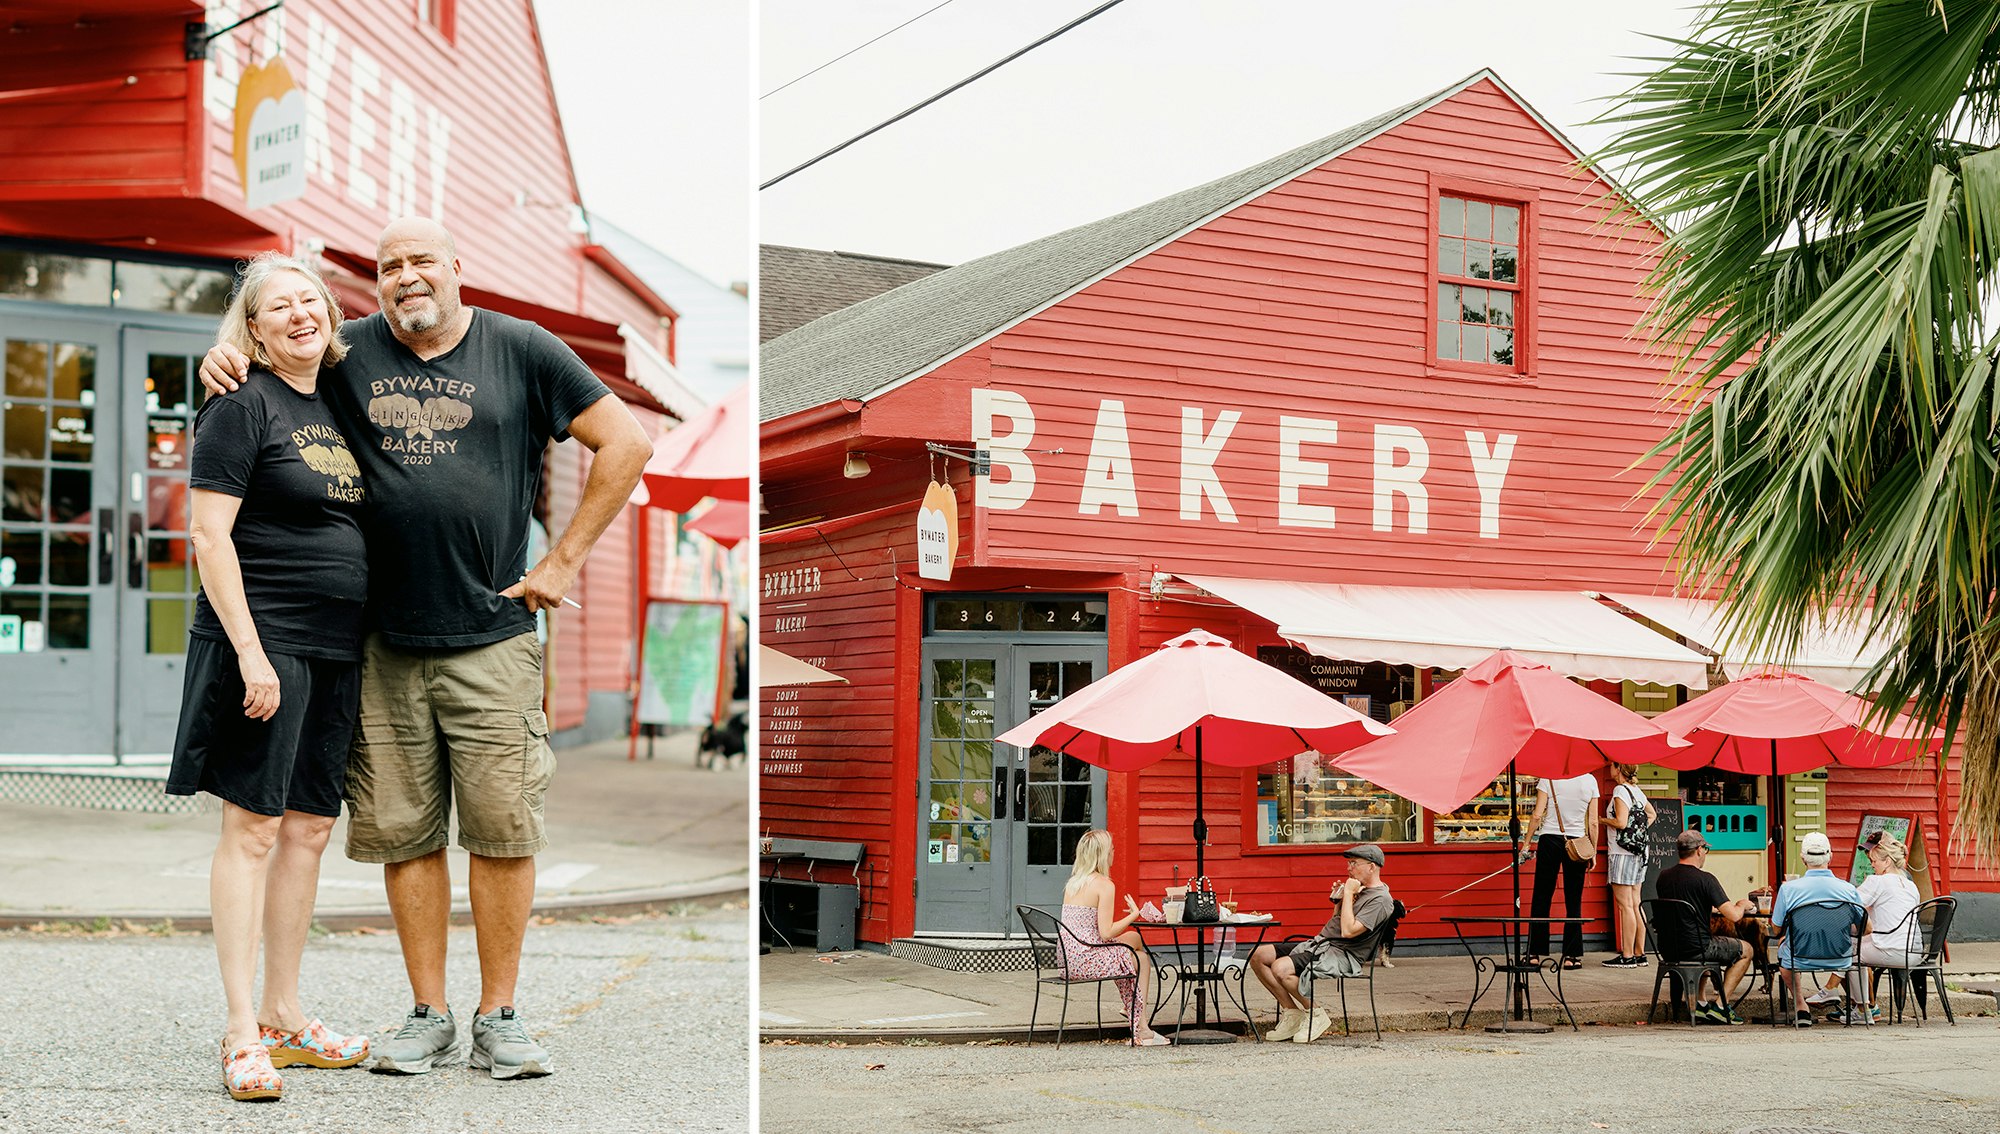 Bywater Bakery, owned by husband and wife Chaya Conrad and Alton Osborn is a staple in the Bywater neighborhood attracting a diverse clientele of locals, tourists and long-time residents from all over the city